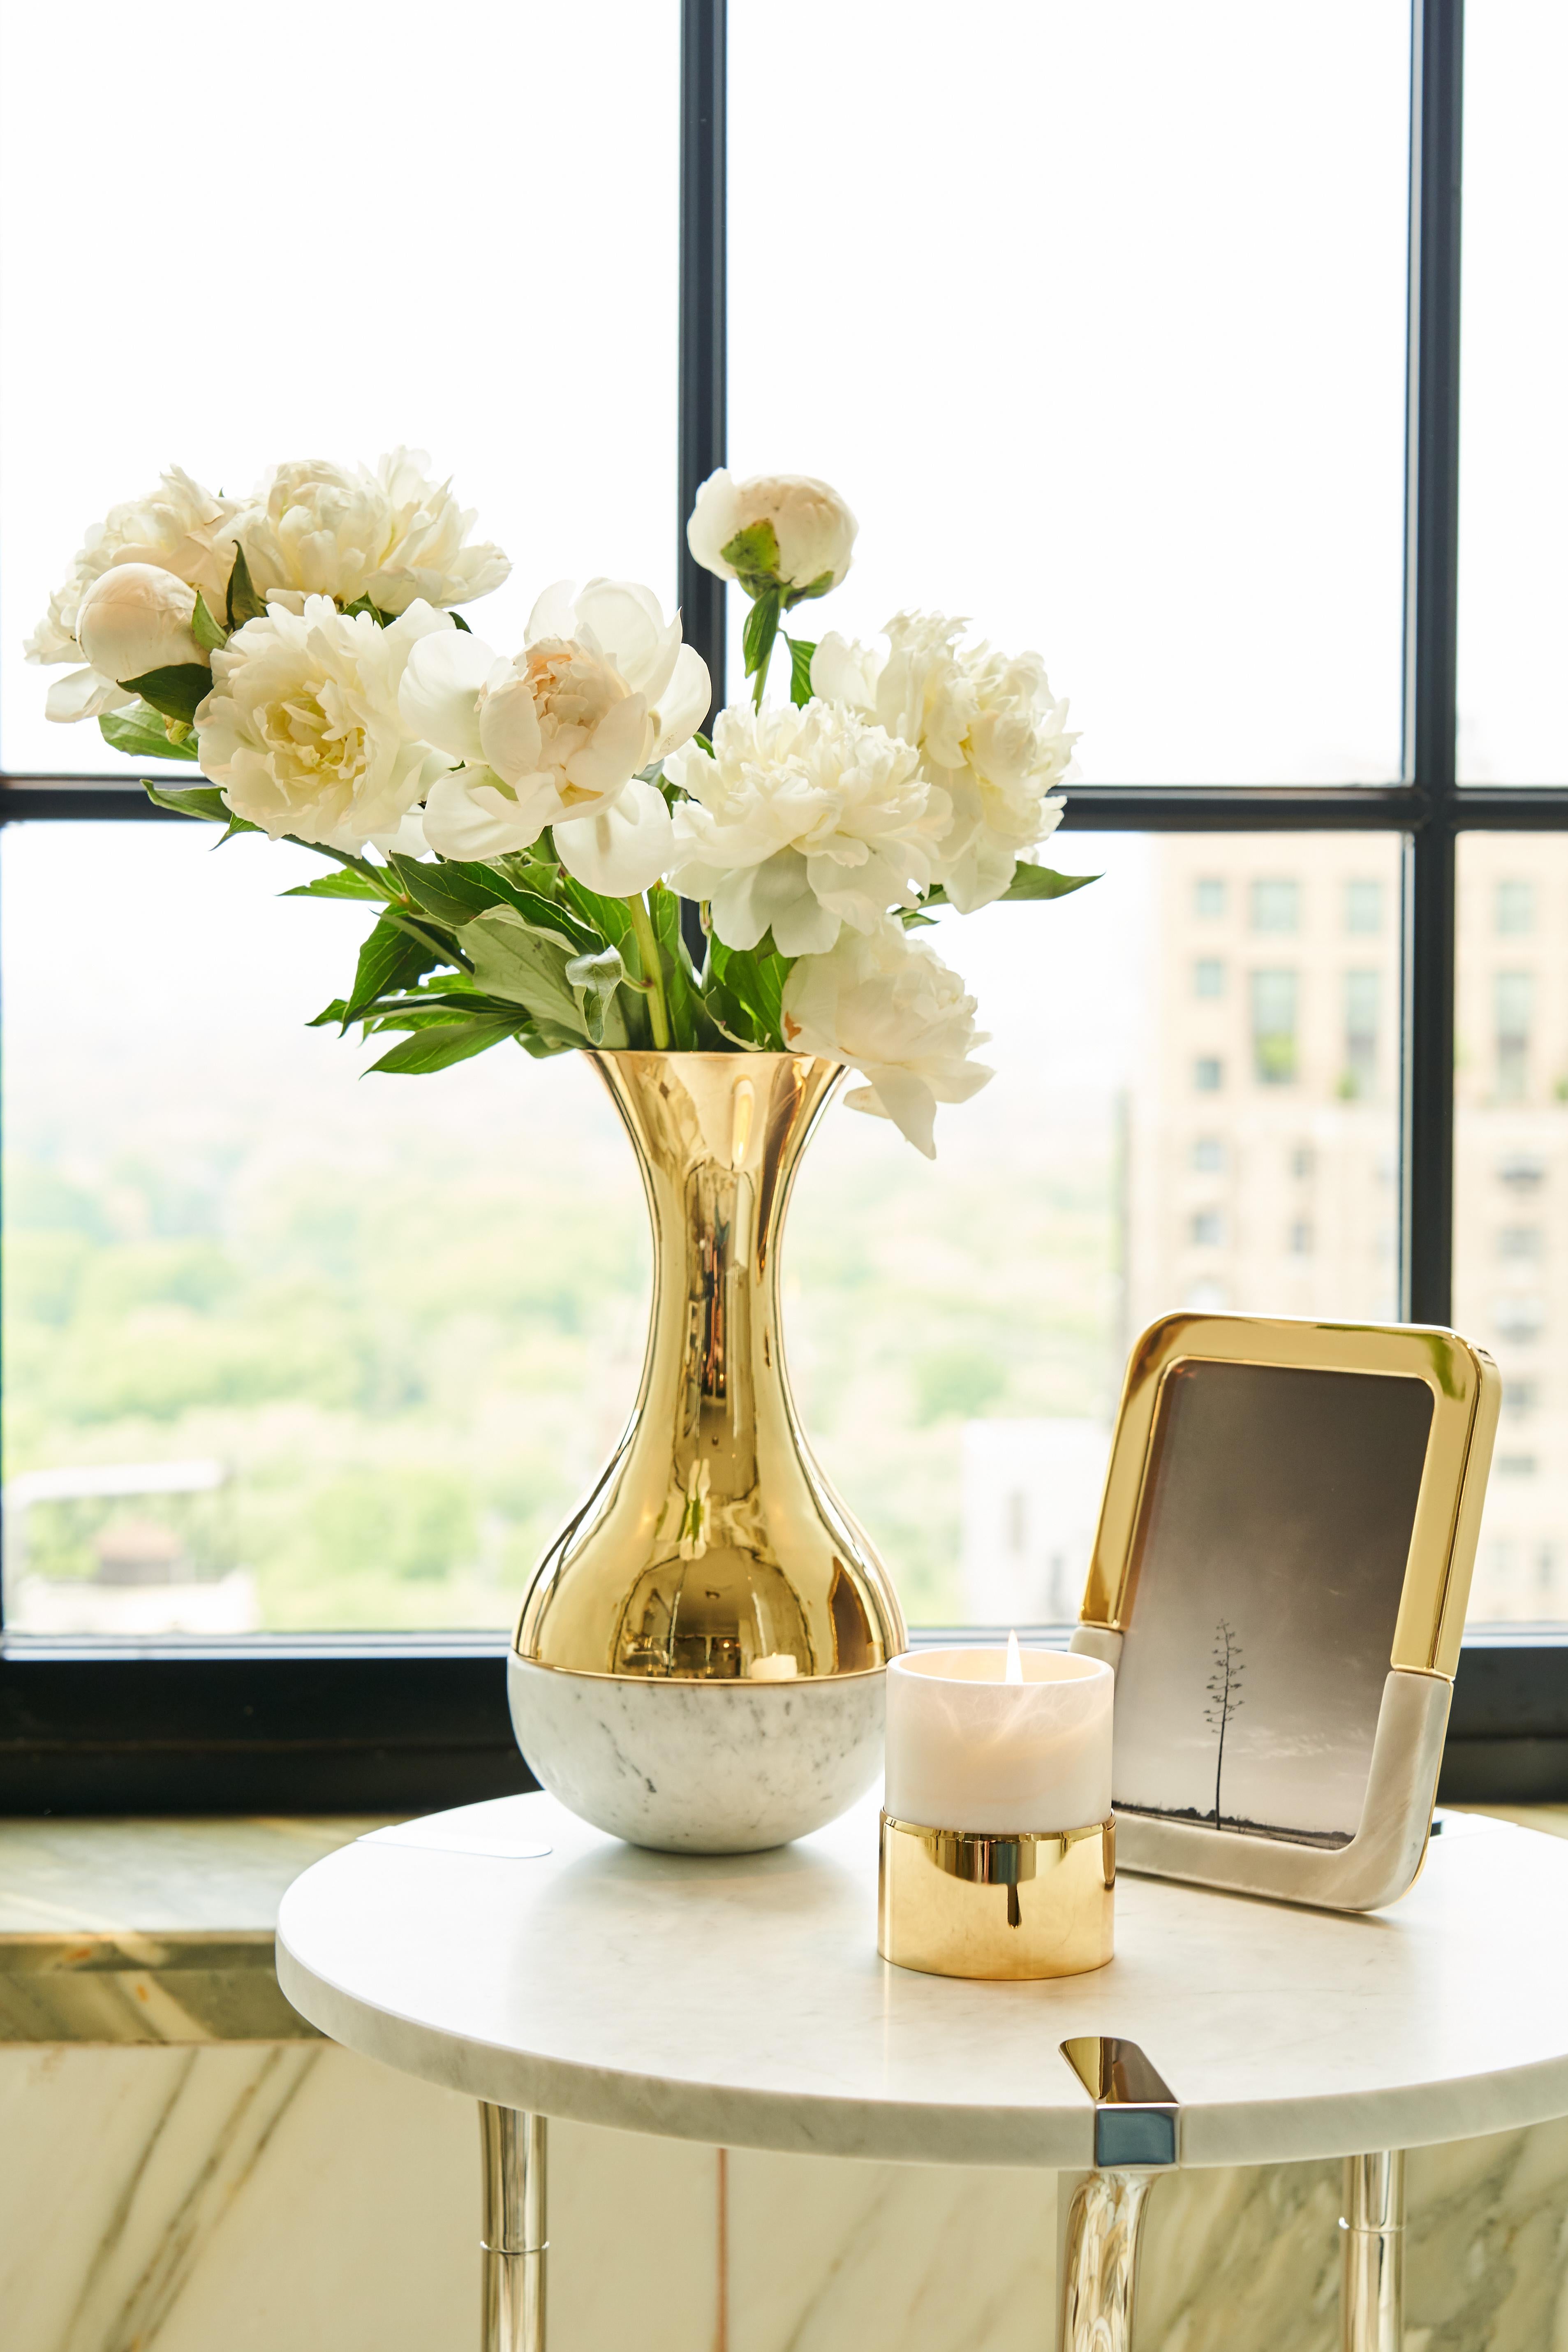 Our Dual collection unites two very different material: honed Italian marble, and polished metal. It is designed to create moments of grace: a bud-vase that holds a single stem of one's favourite flowe, candlesticks that adorn the table when friends